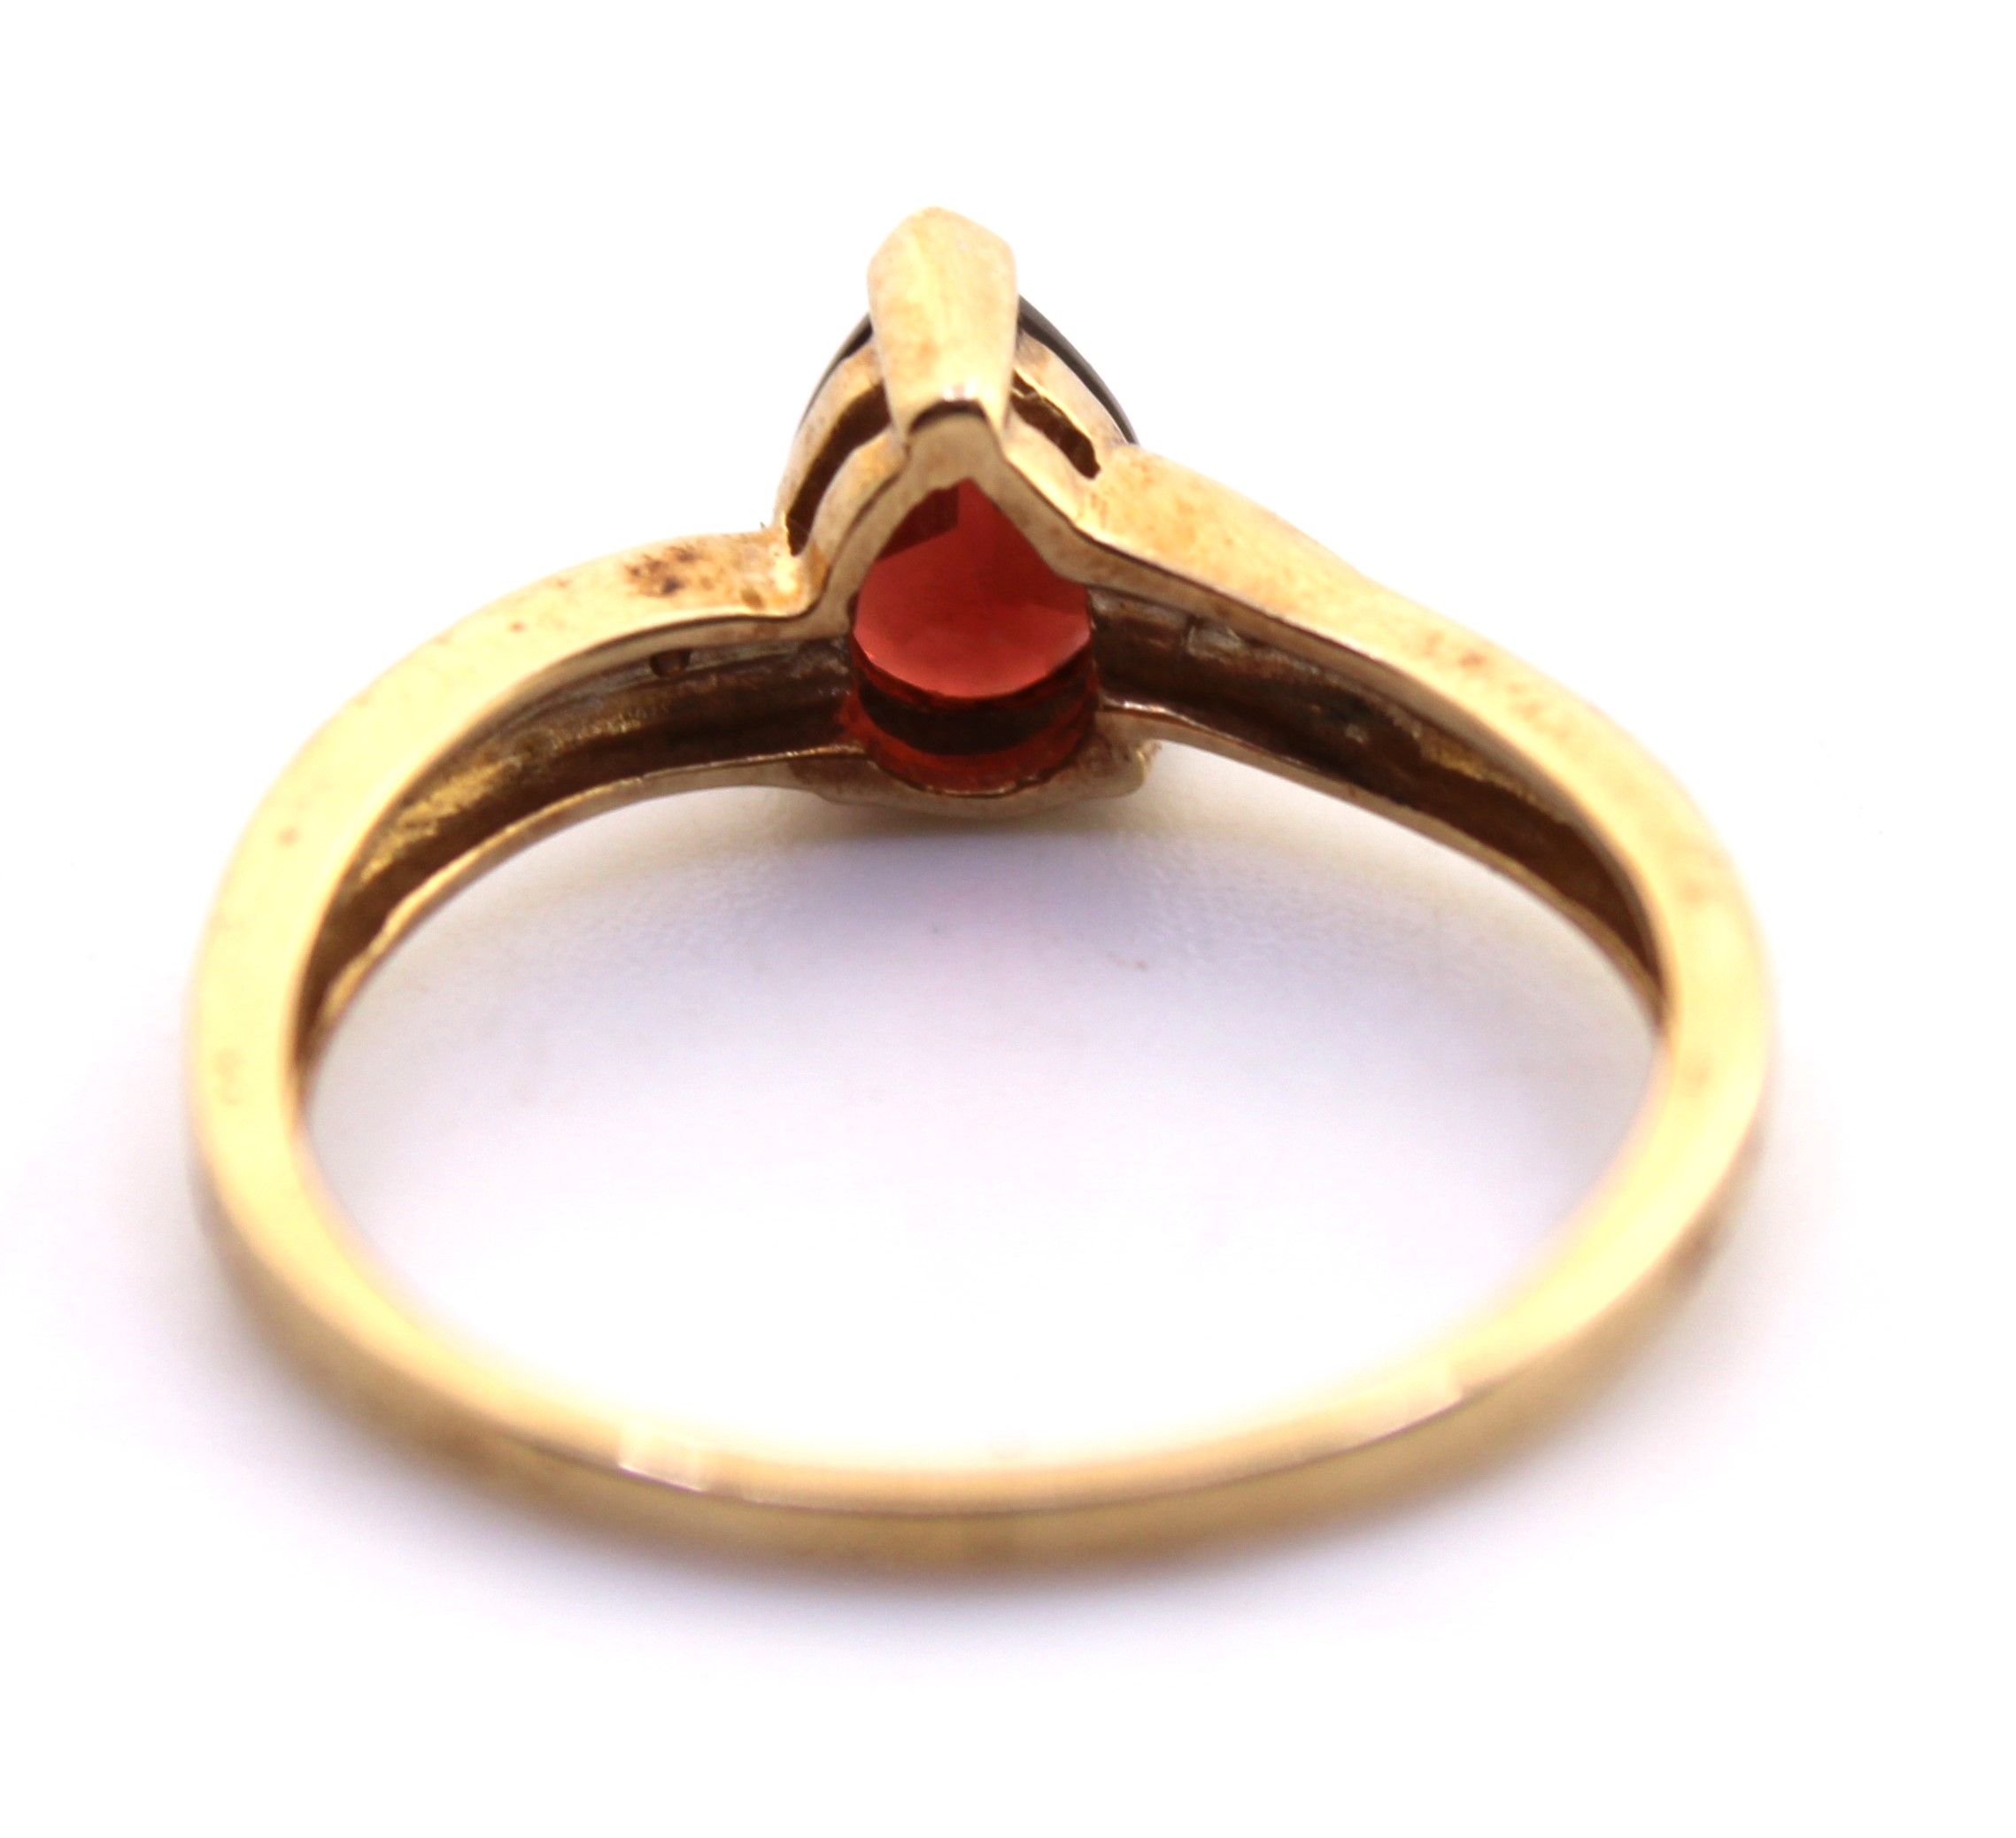 9ct Yellow Gold Pear Cut Garnet and Diamond Ring.  The Garnet measures approx. 7mm in length and - Image 3 of 3